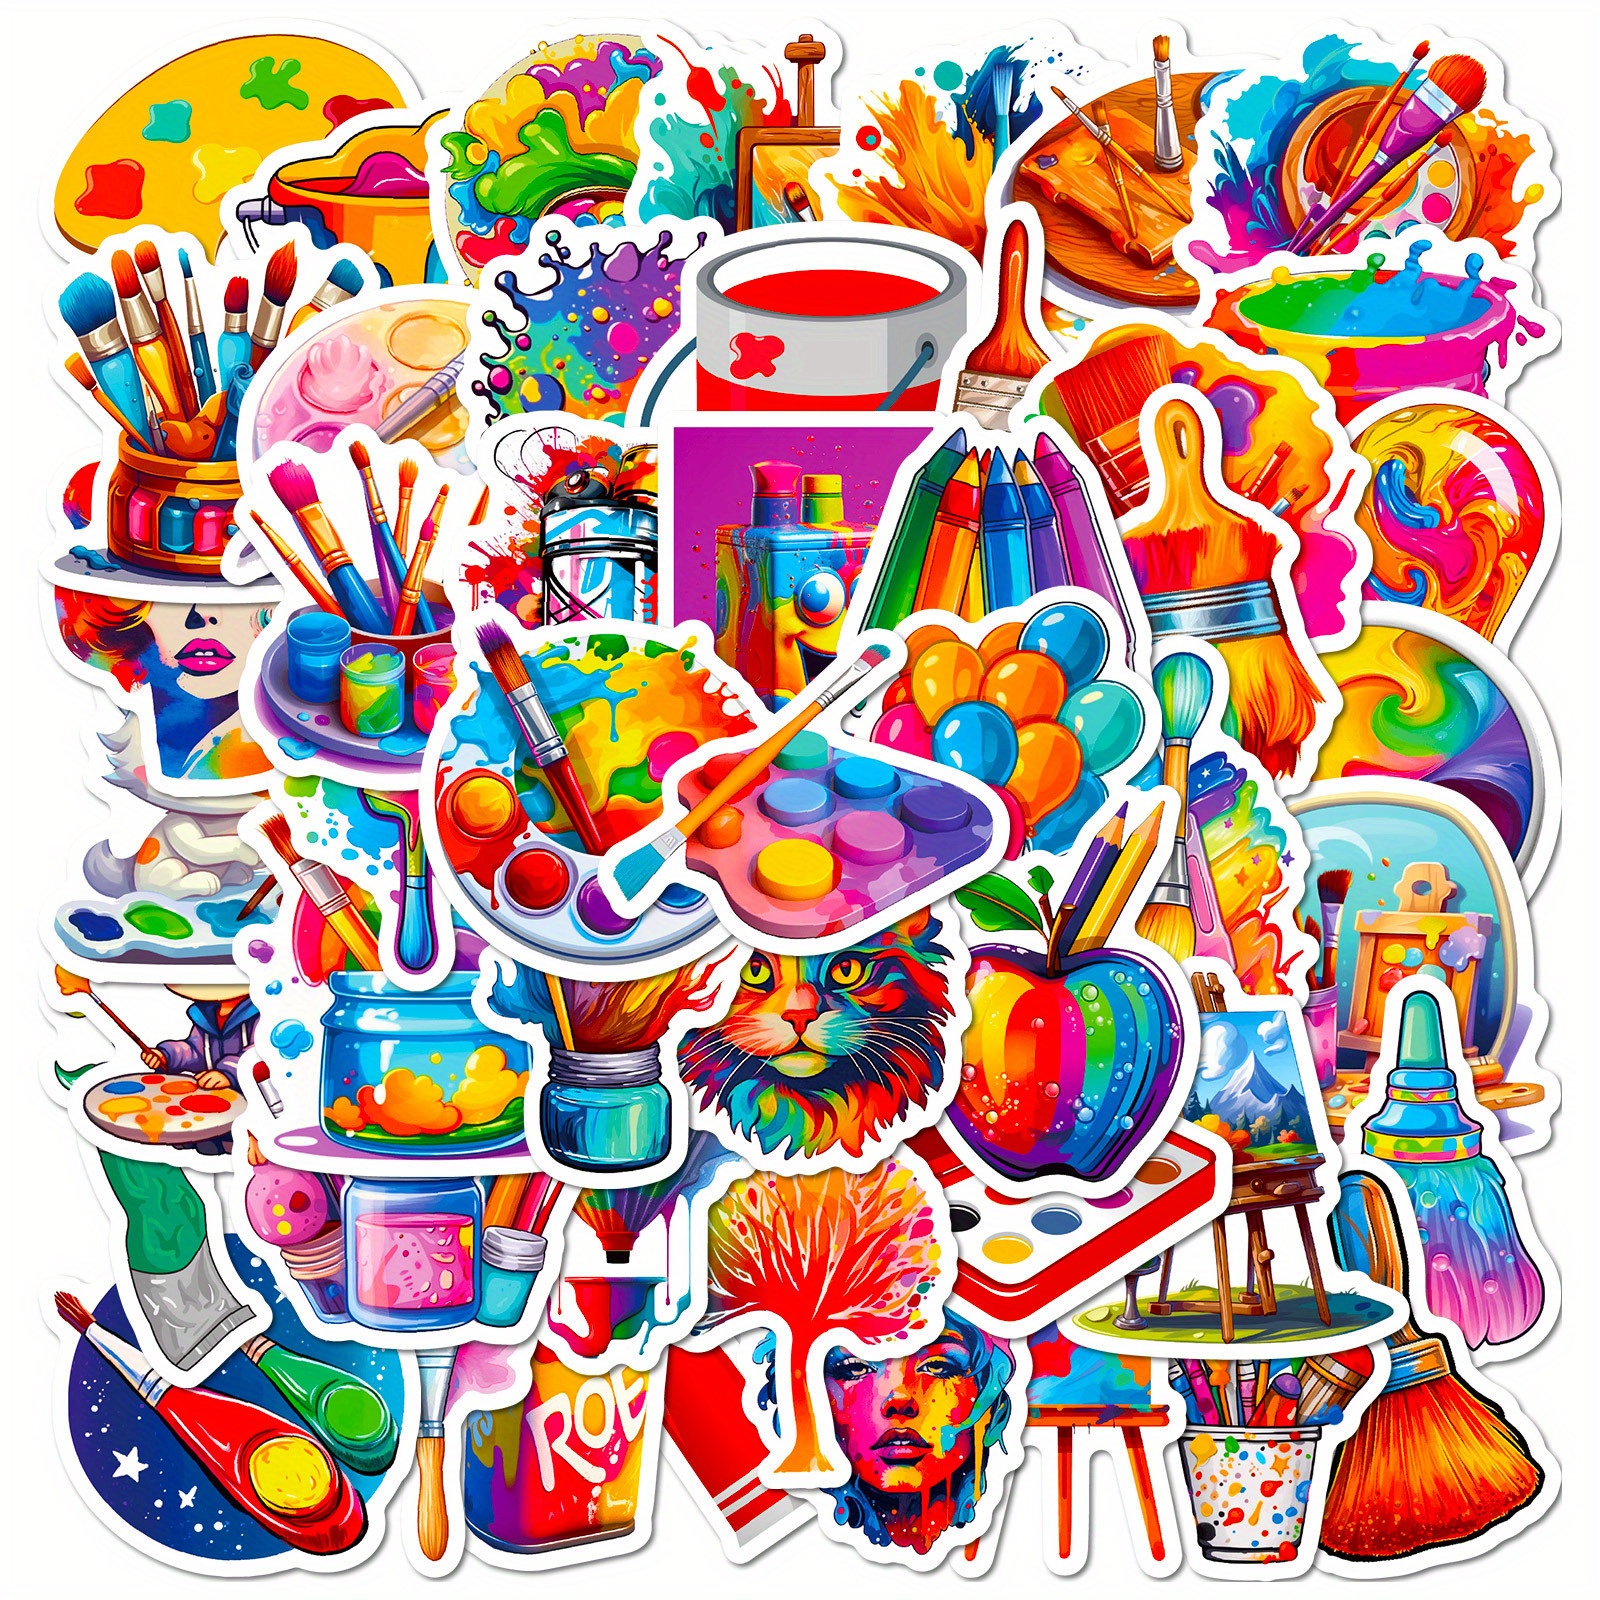 50pcs Cartoon Cute Fun Greek Mythology Aesthetics Stickers For Decoration  Stationery, Books, Laptops, Water Cups, Mobile Cases, Suitcases, Guitars, An